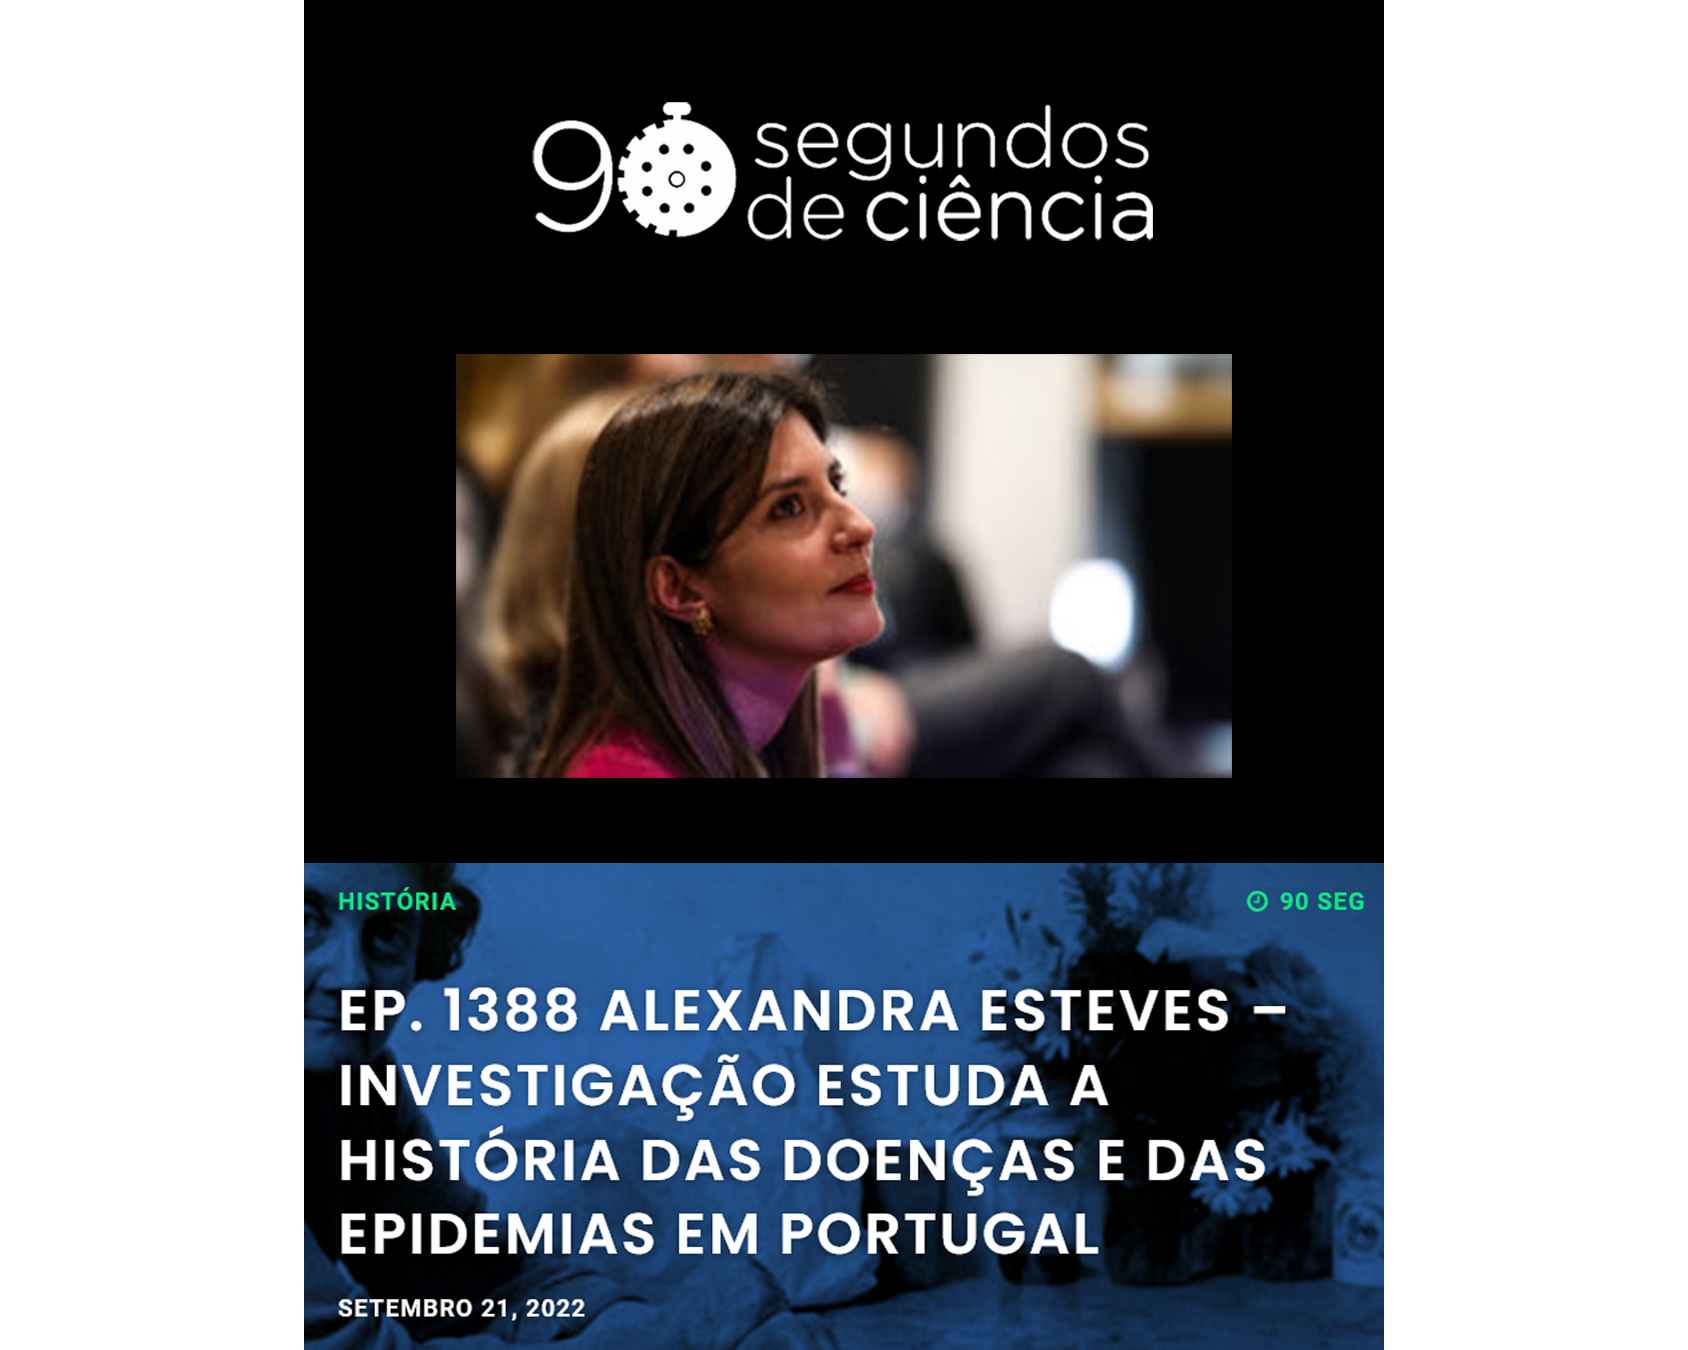 Alexandra Esteves – Research studies the history of diseases and epidemics in Portugal image